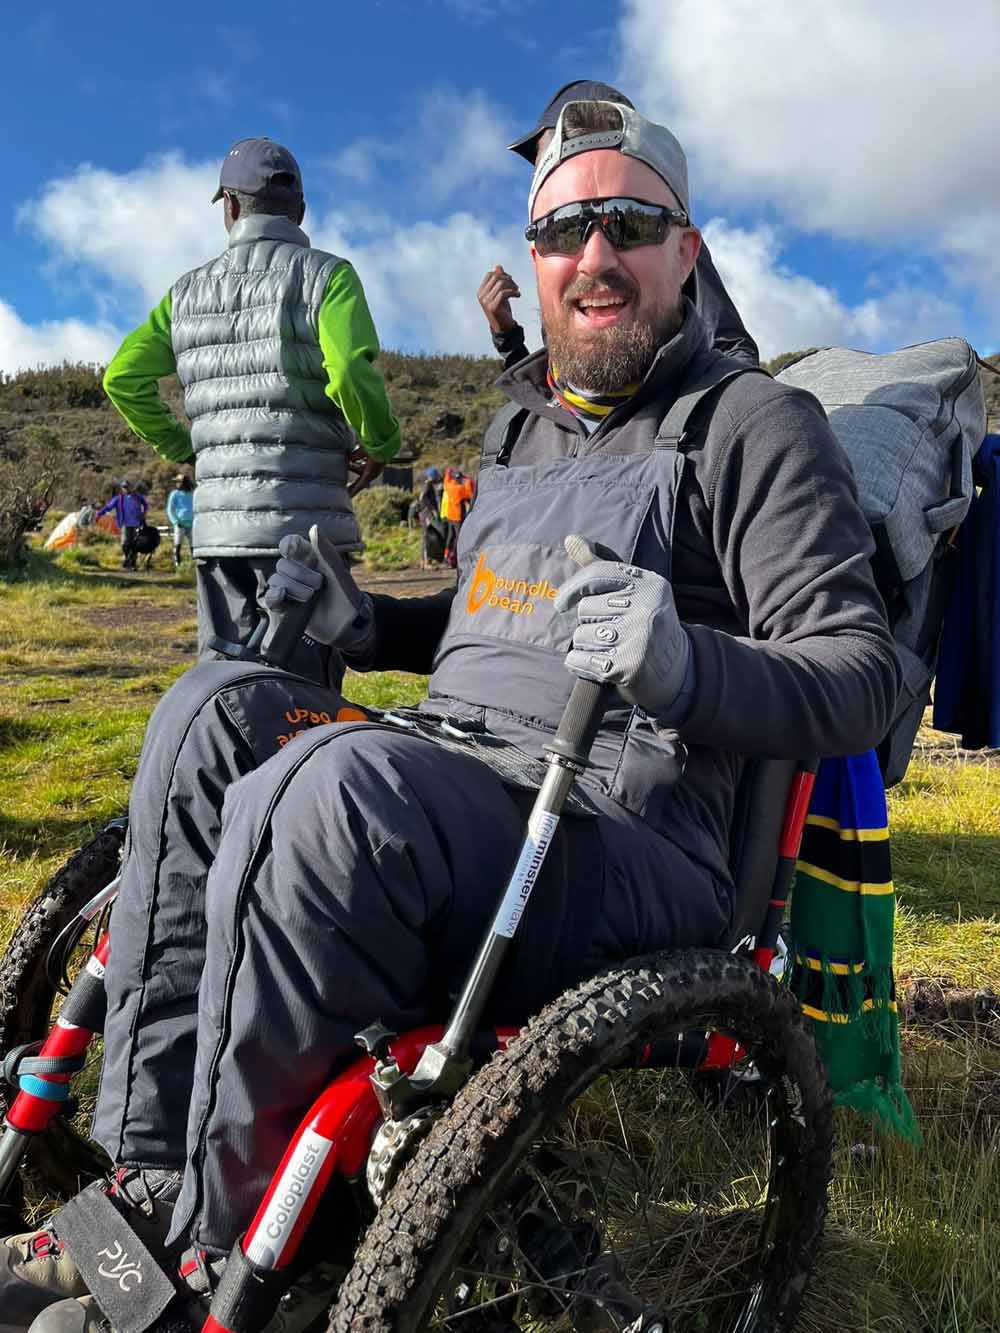 Martin bought a mountain trike which he used to climb the mountain. (Collect/PA Real Life)